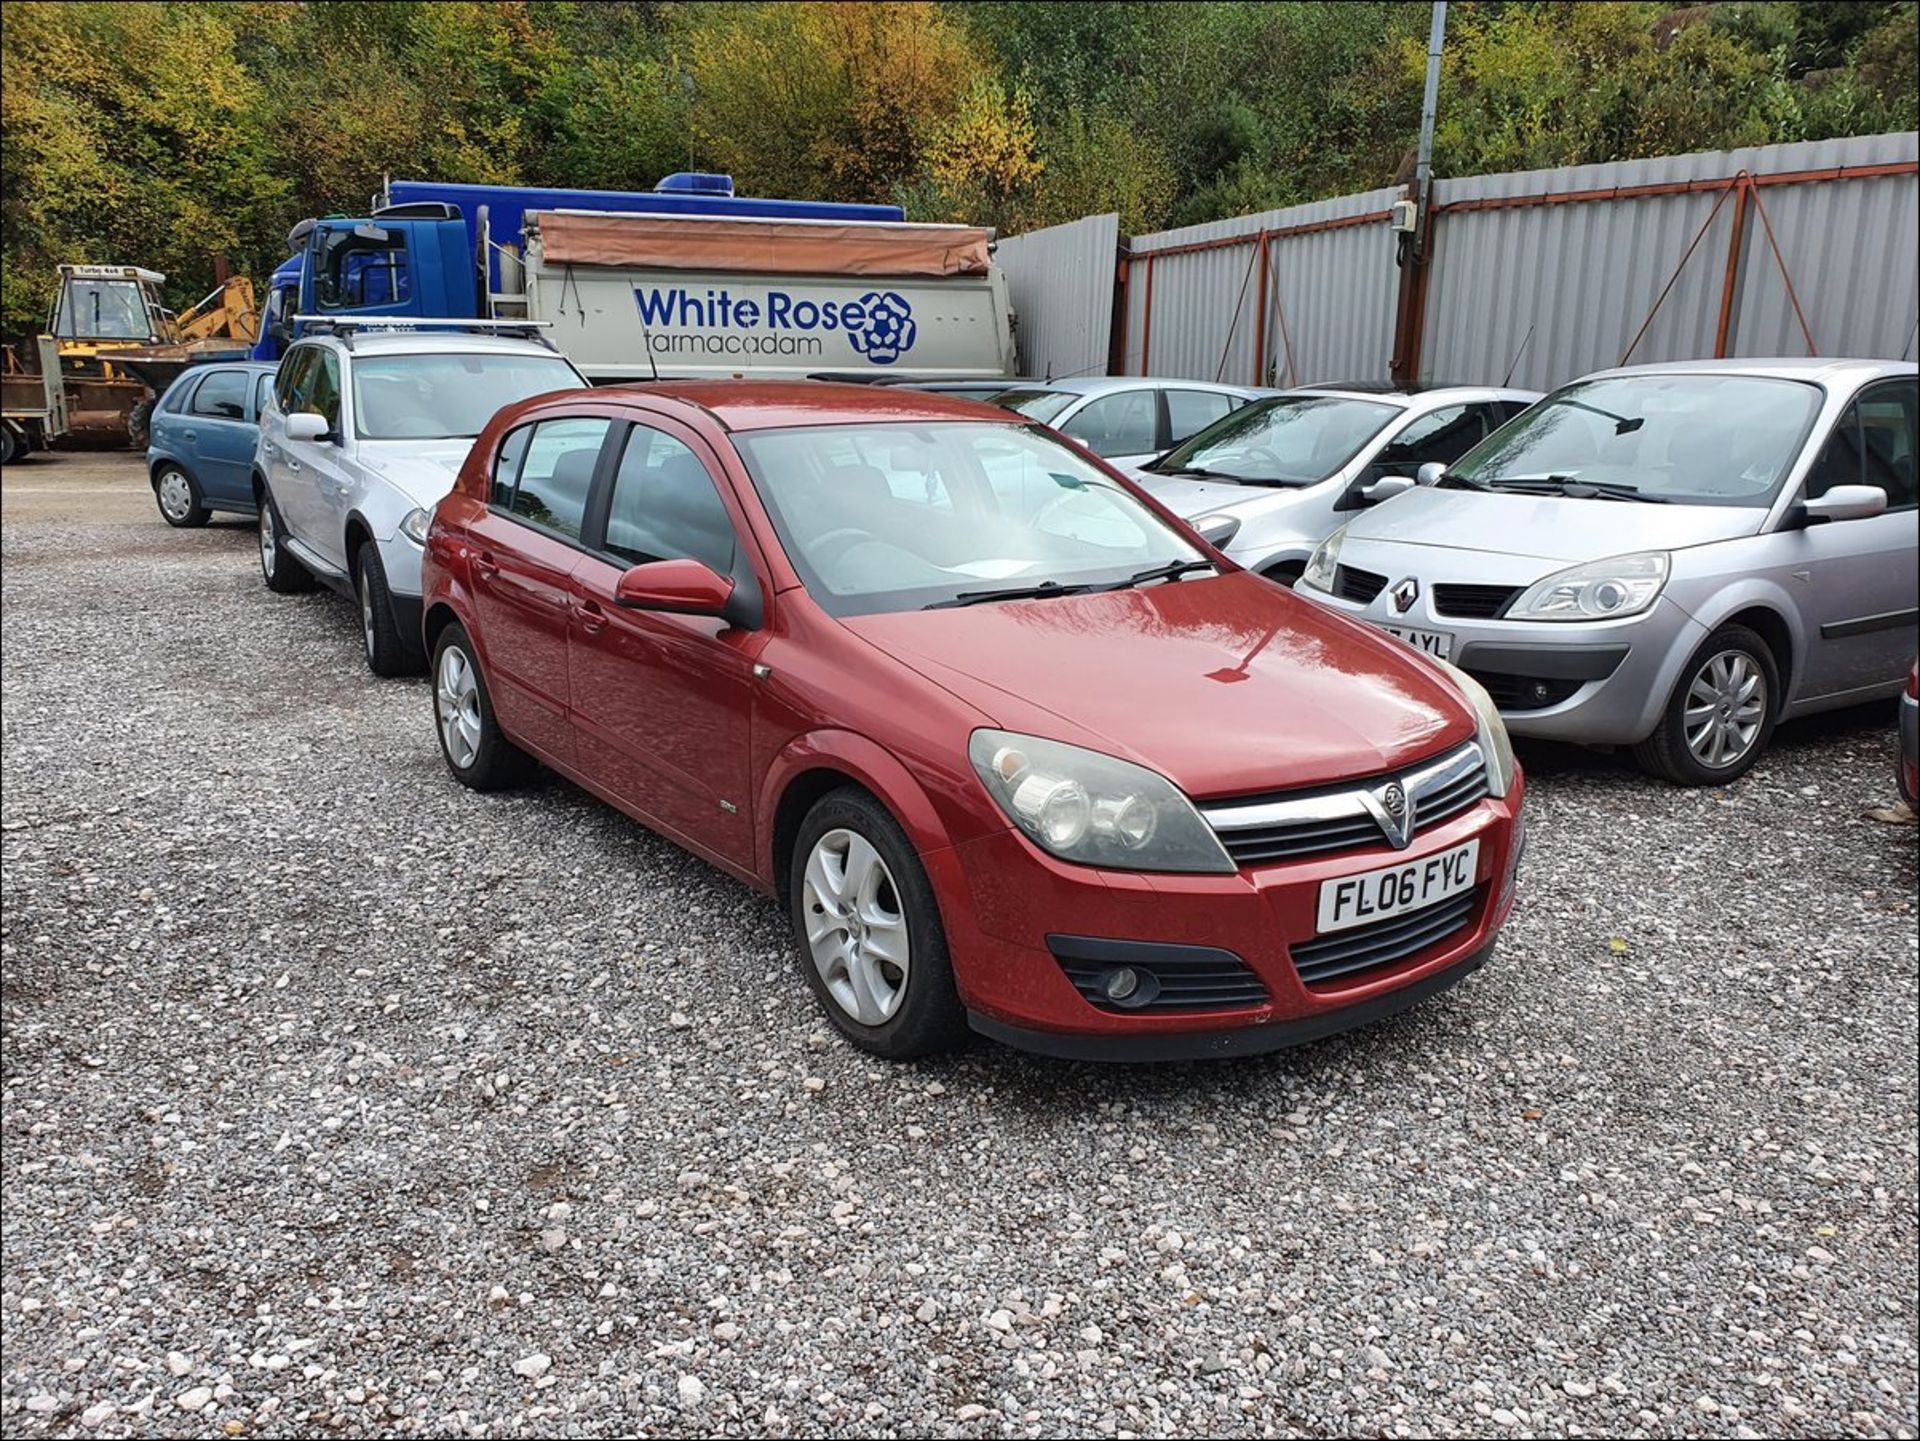 06/06 VAUXHALL ASTRA SXI TWINPORT - 1598cc 5dr Hatchback (Red, 124k) - Image 7 of 9